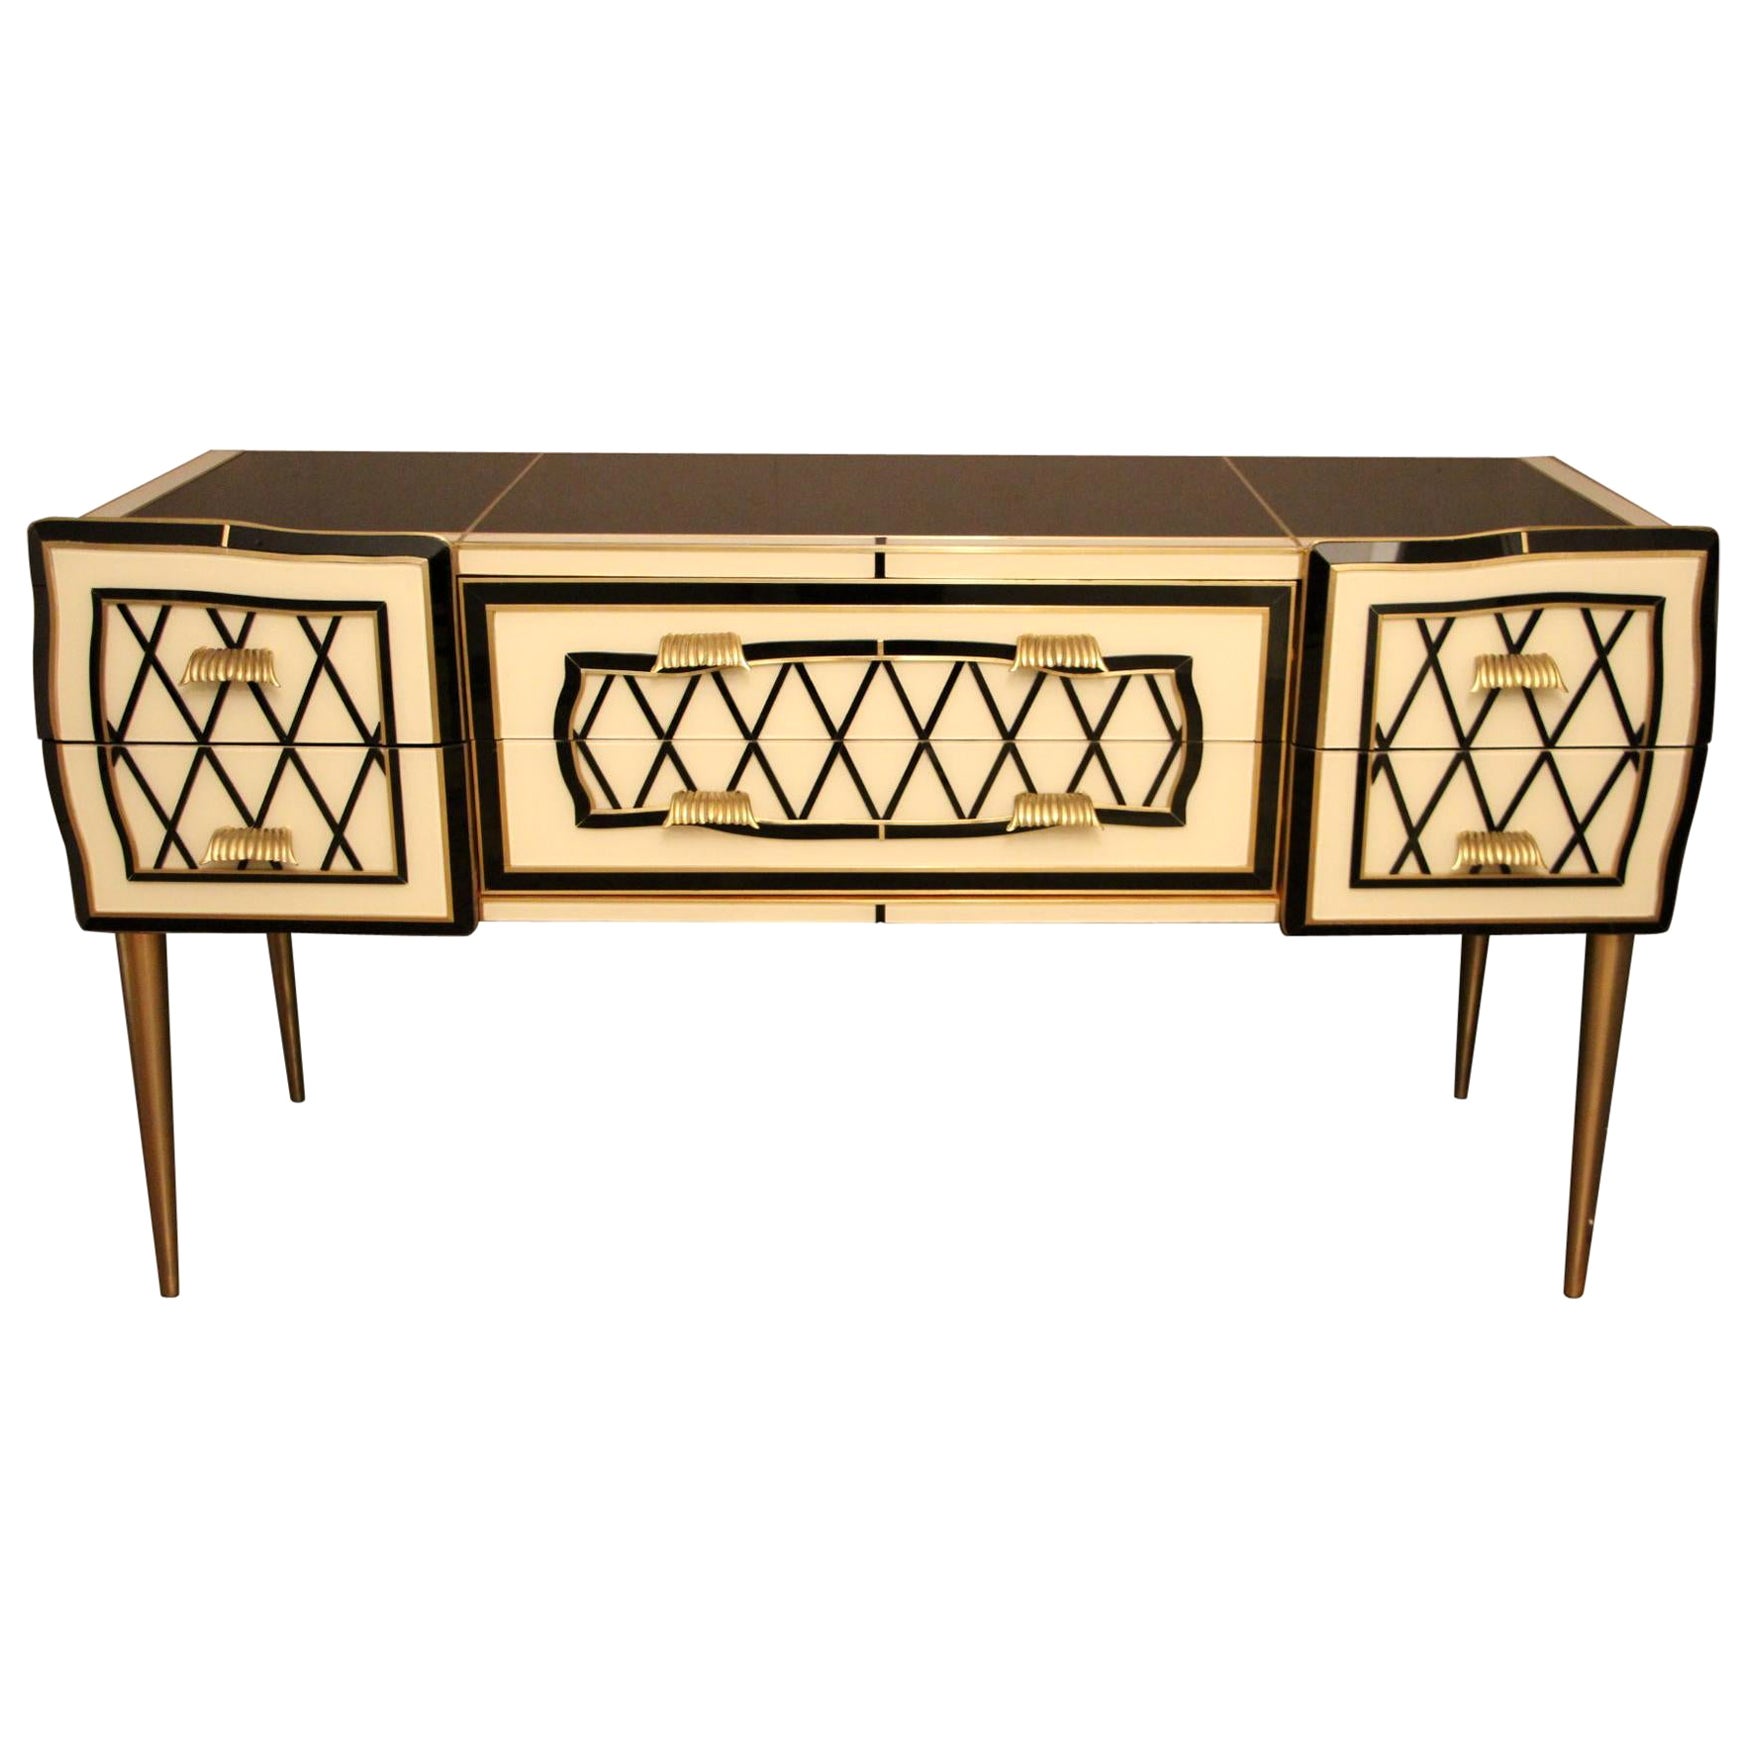 Murano Black and White Tinted Glass Commode or Sideboard with Brass Hardware For Sale